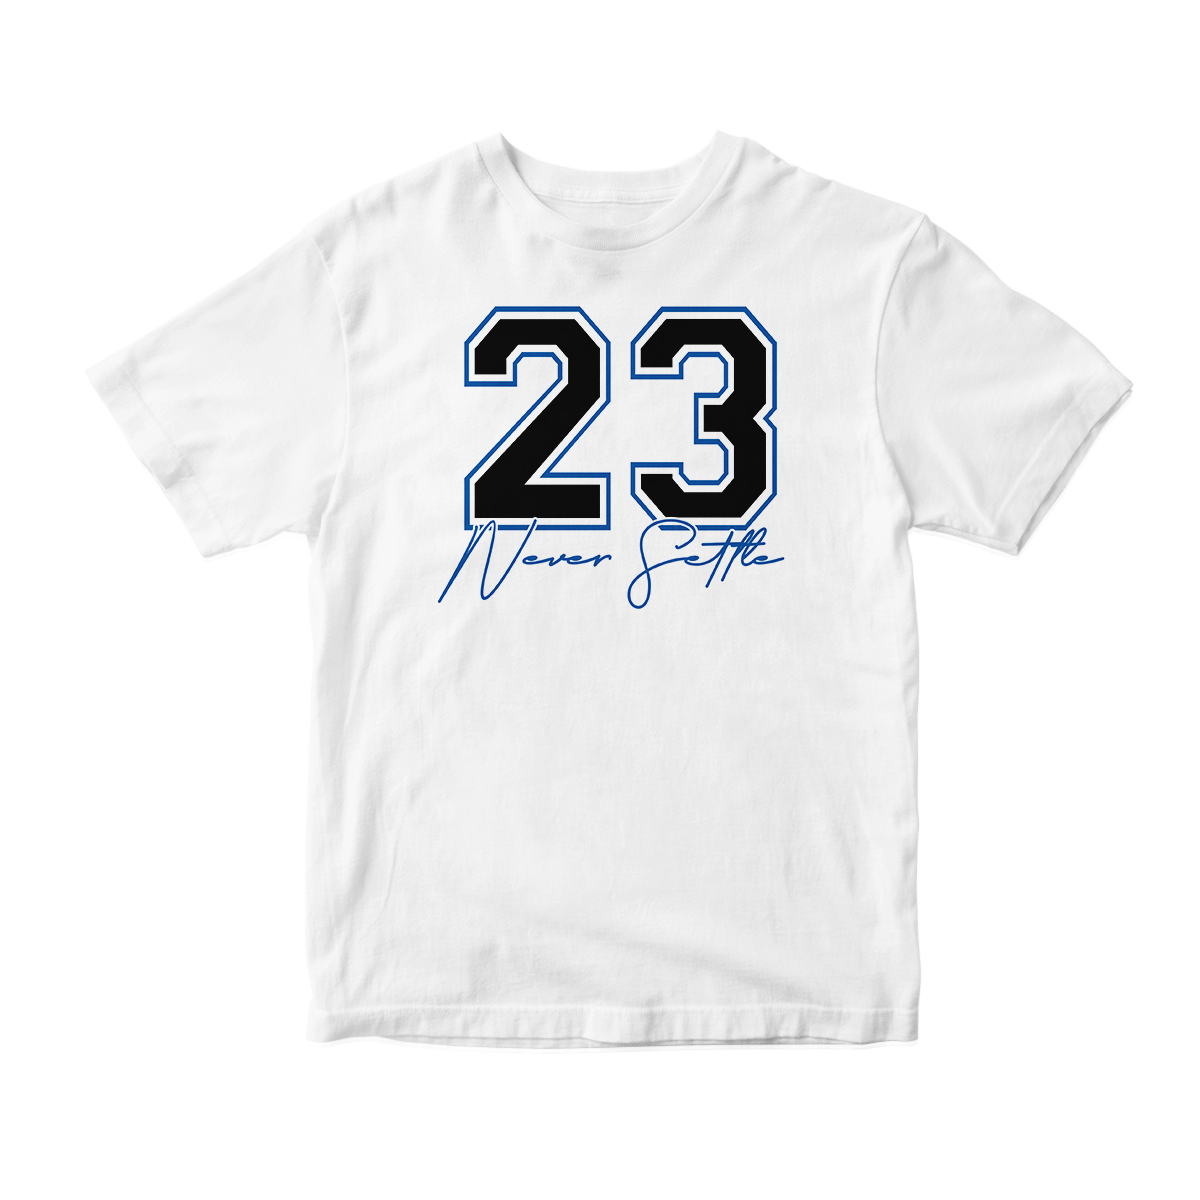 'Never Settle' in Game Royal CW Unisex Short Sleeve Tee